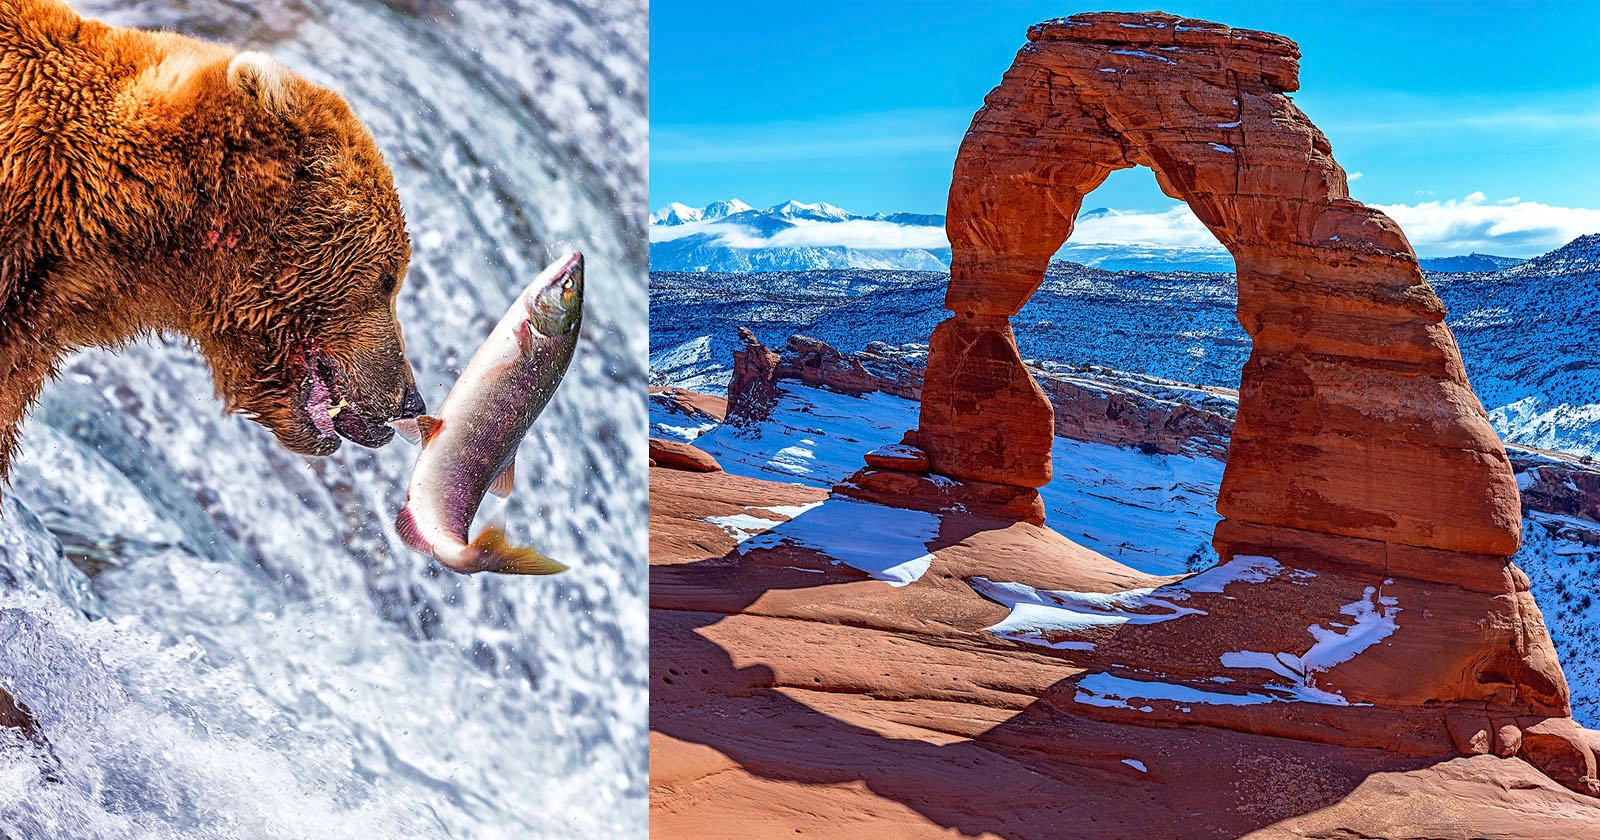 This Photographer Has Visited 27 of the 63 US National Parks